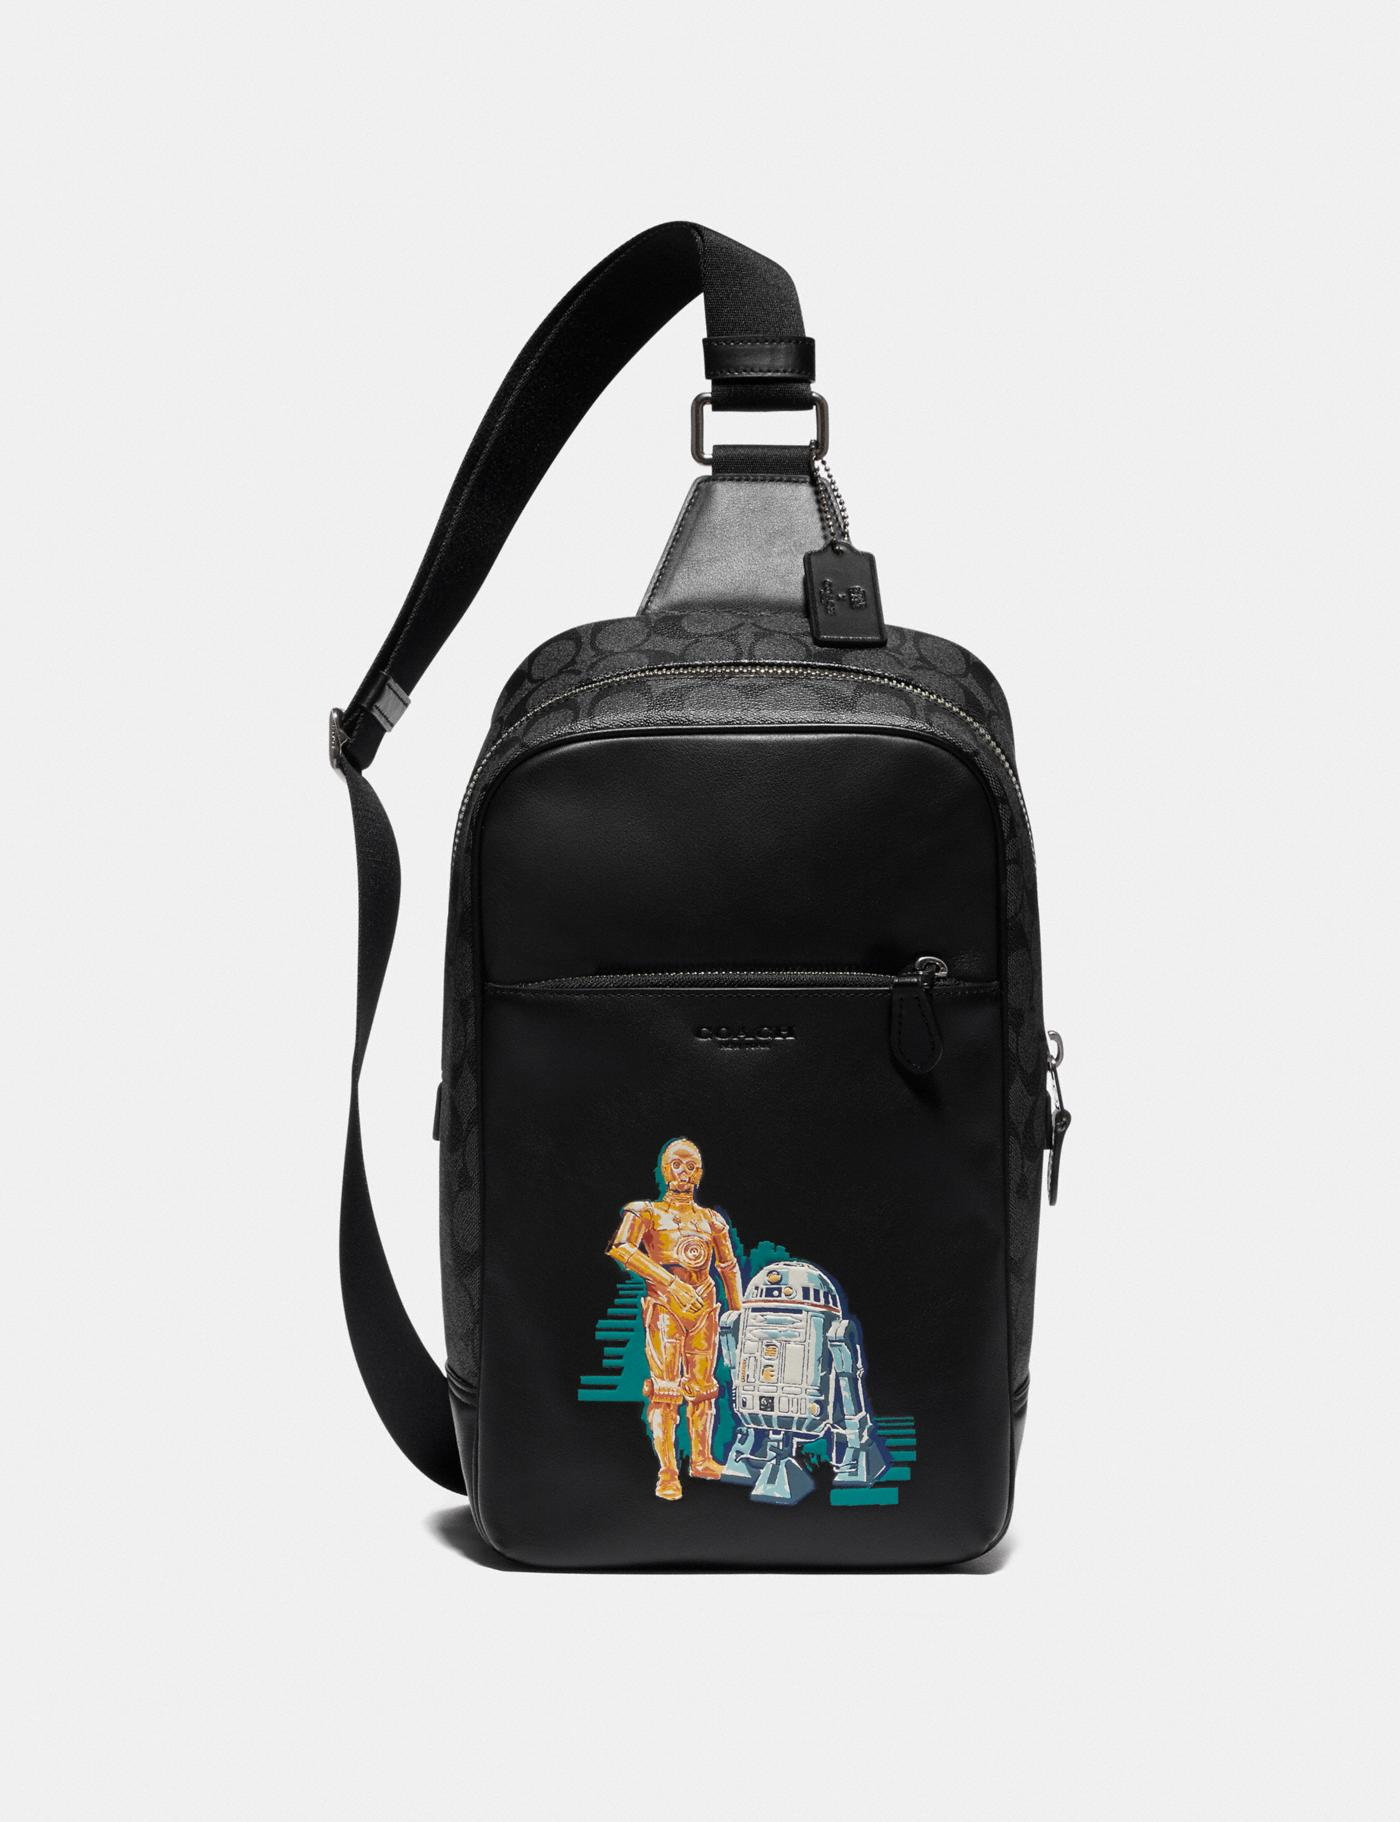 Coach x Star Wars 2019 Collection